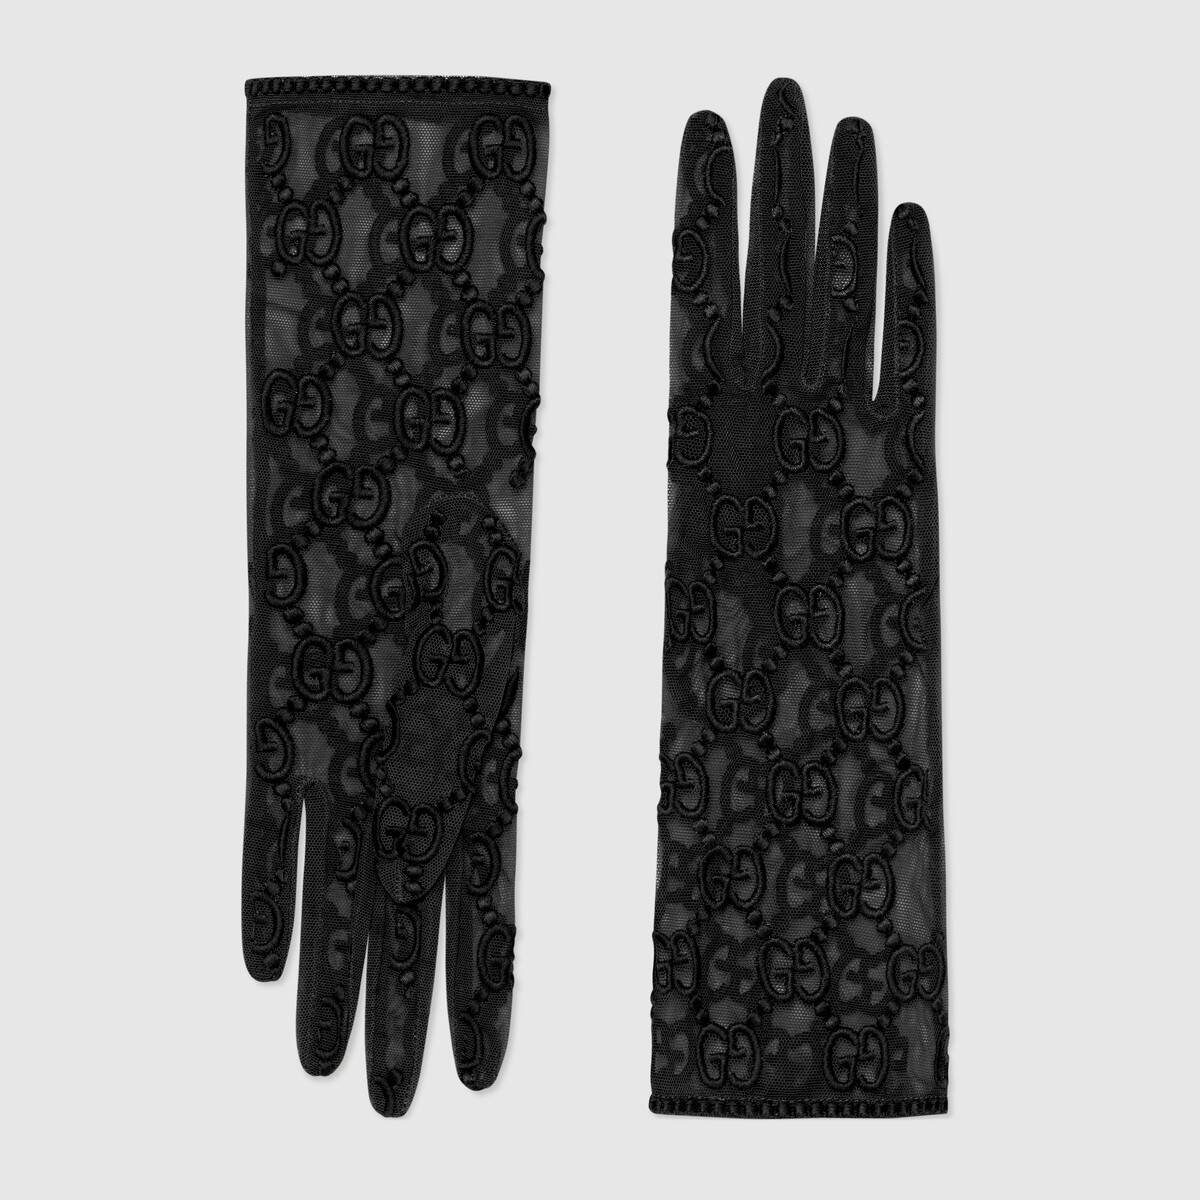 Gucci logo embroidered sheer lace gloves